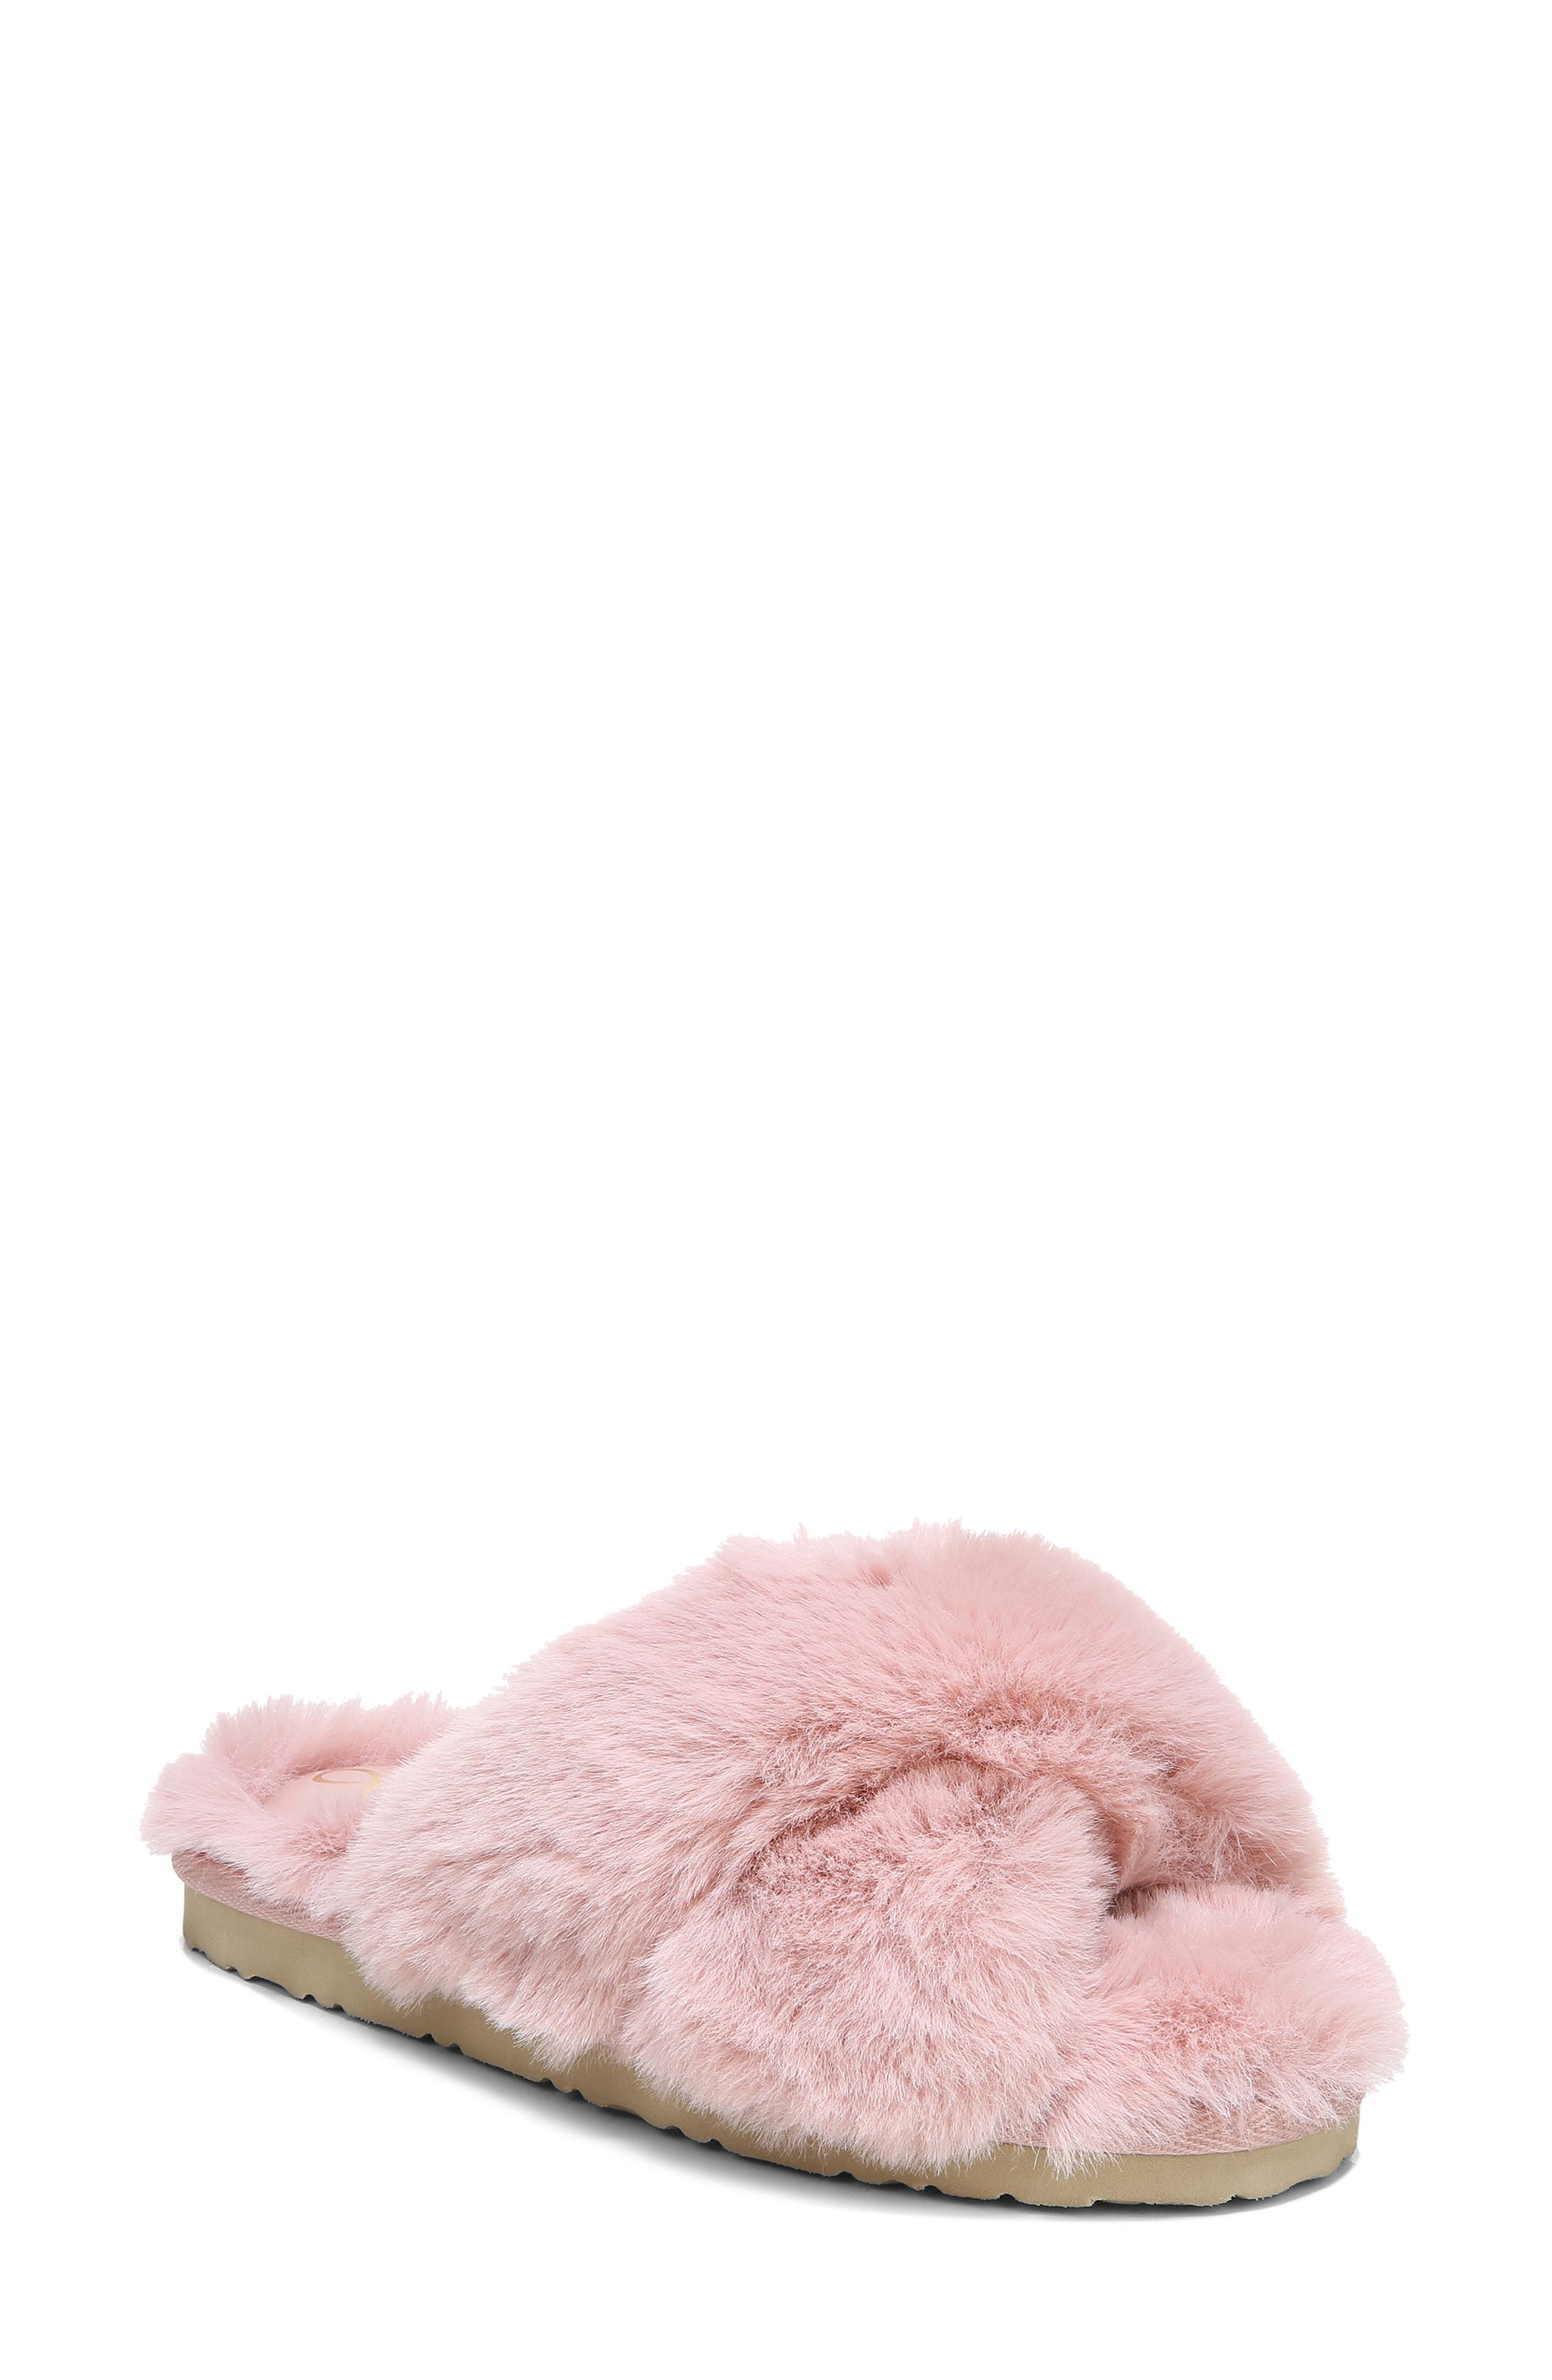 bright pink fluffy slippers